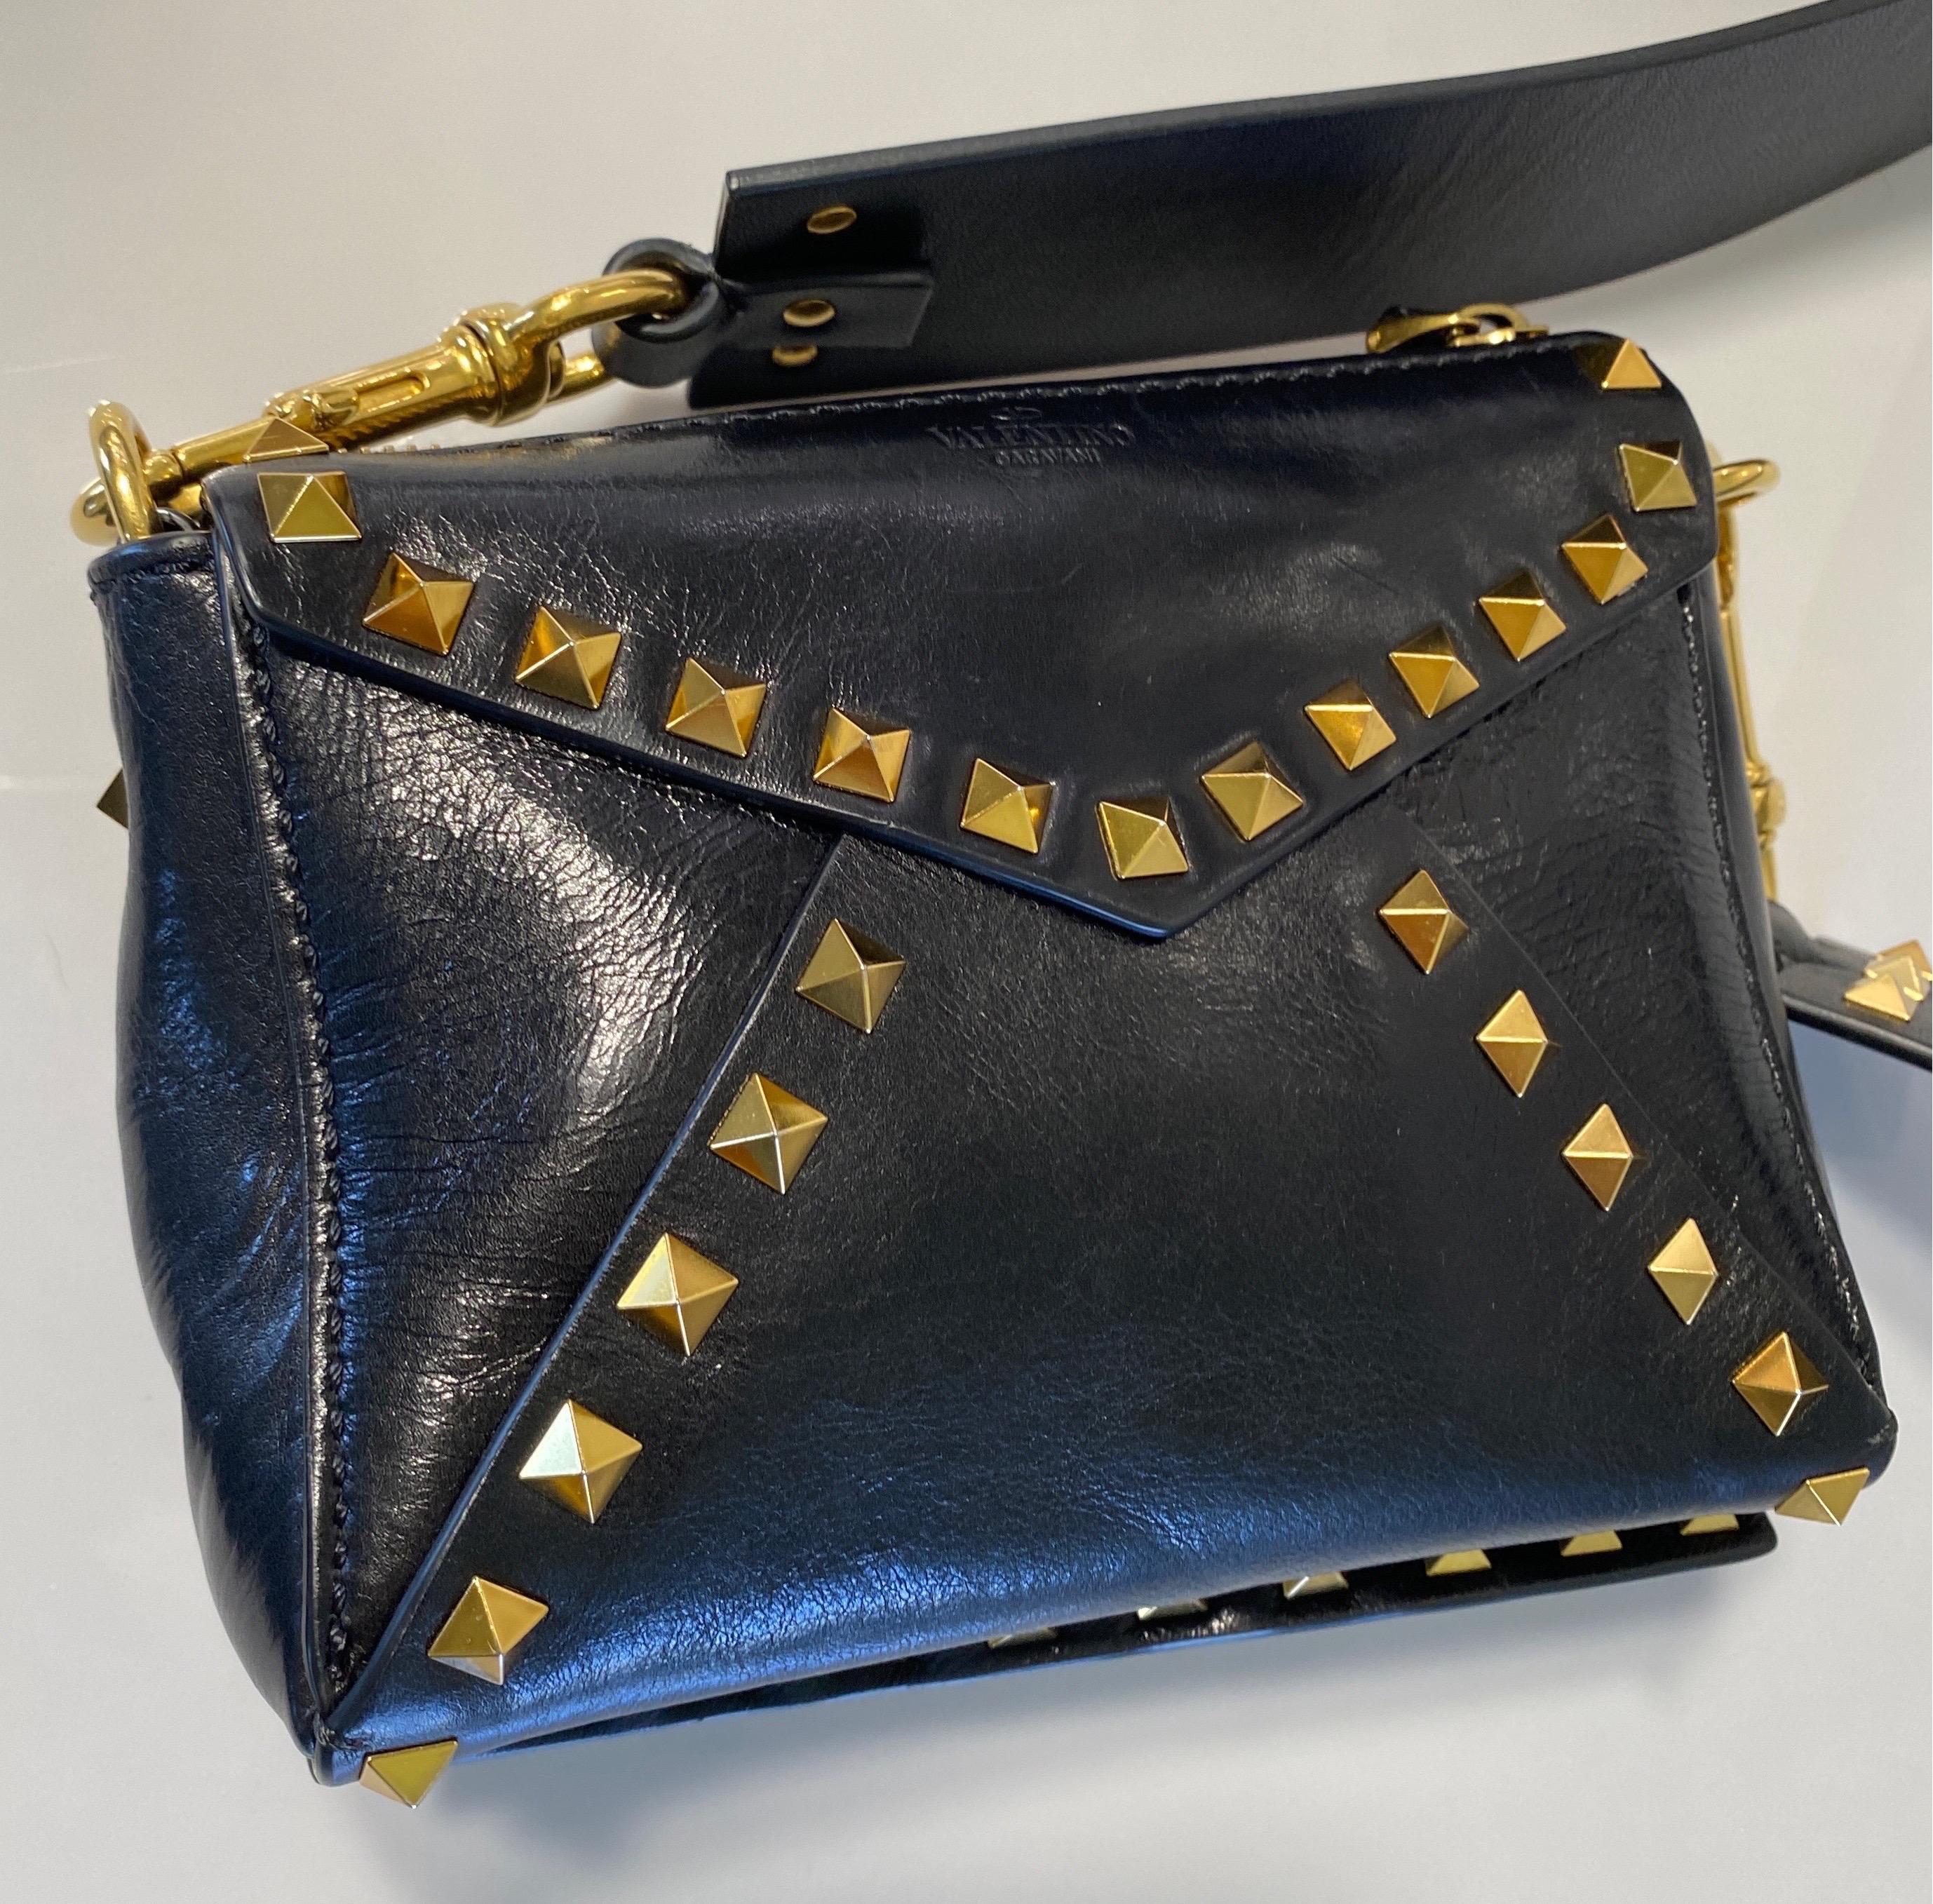 Valentino Black Small Rock Stud Calf Leather Crossbody Bag with Wide Strap 5